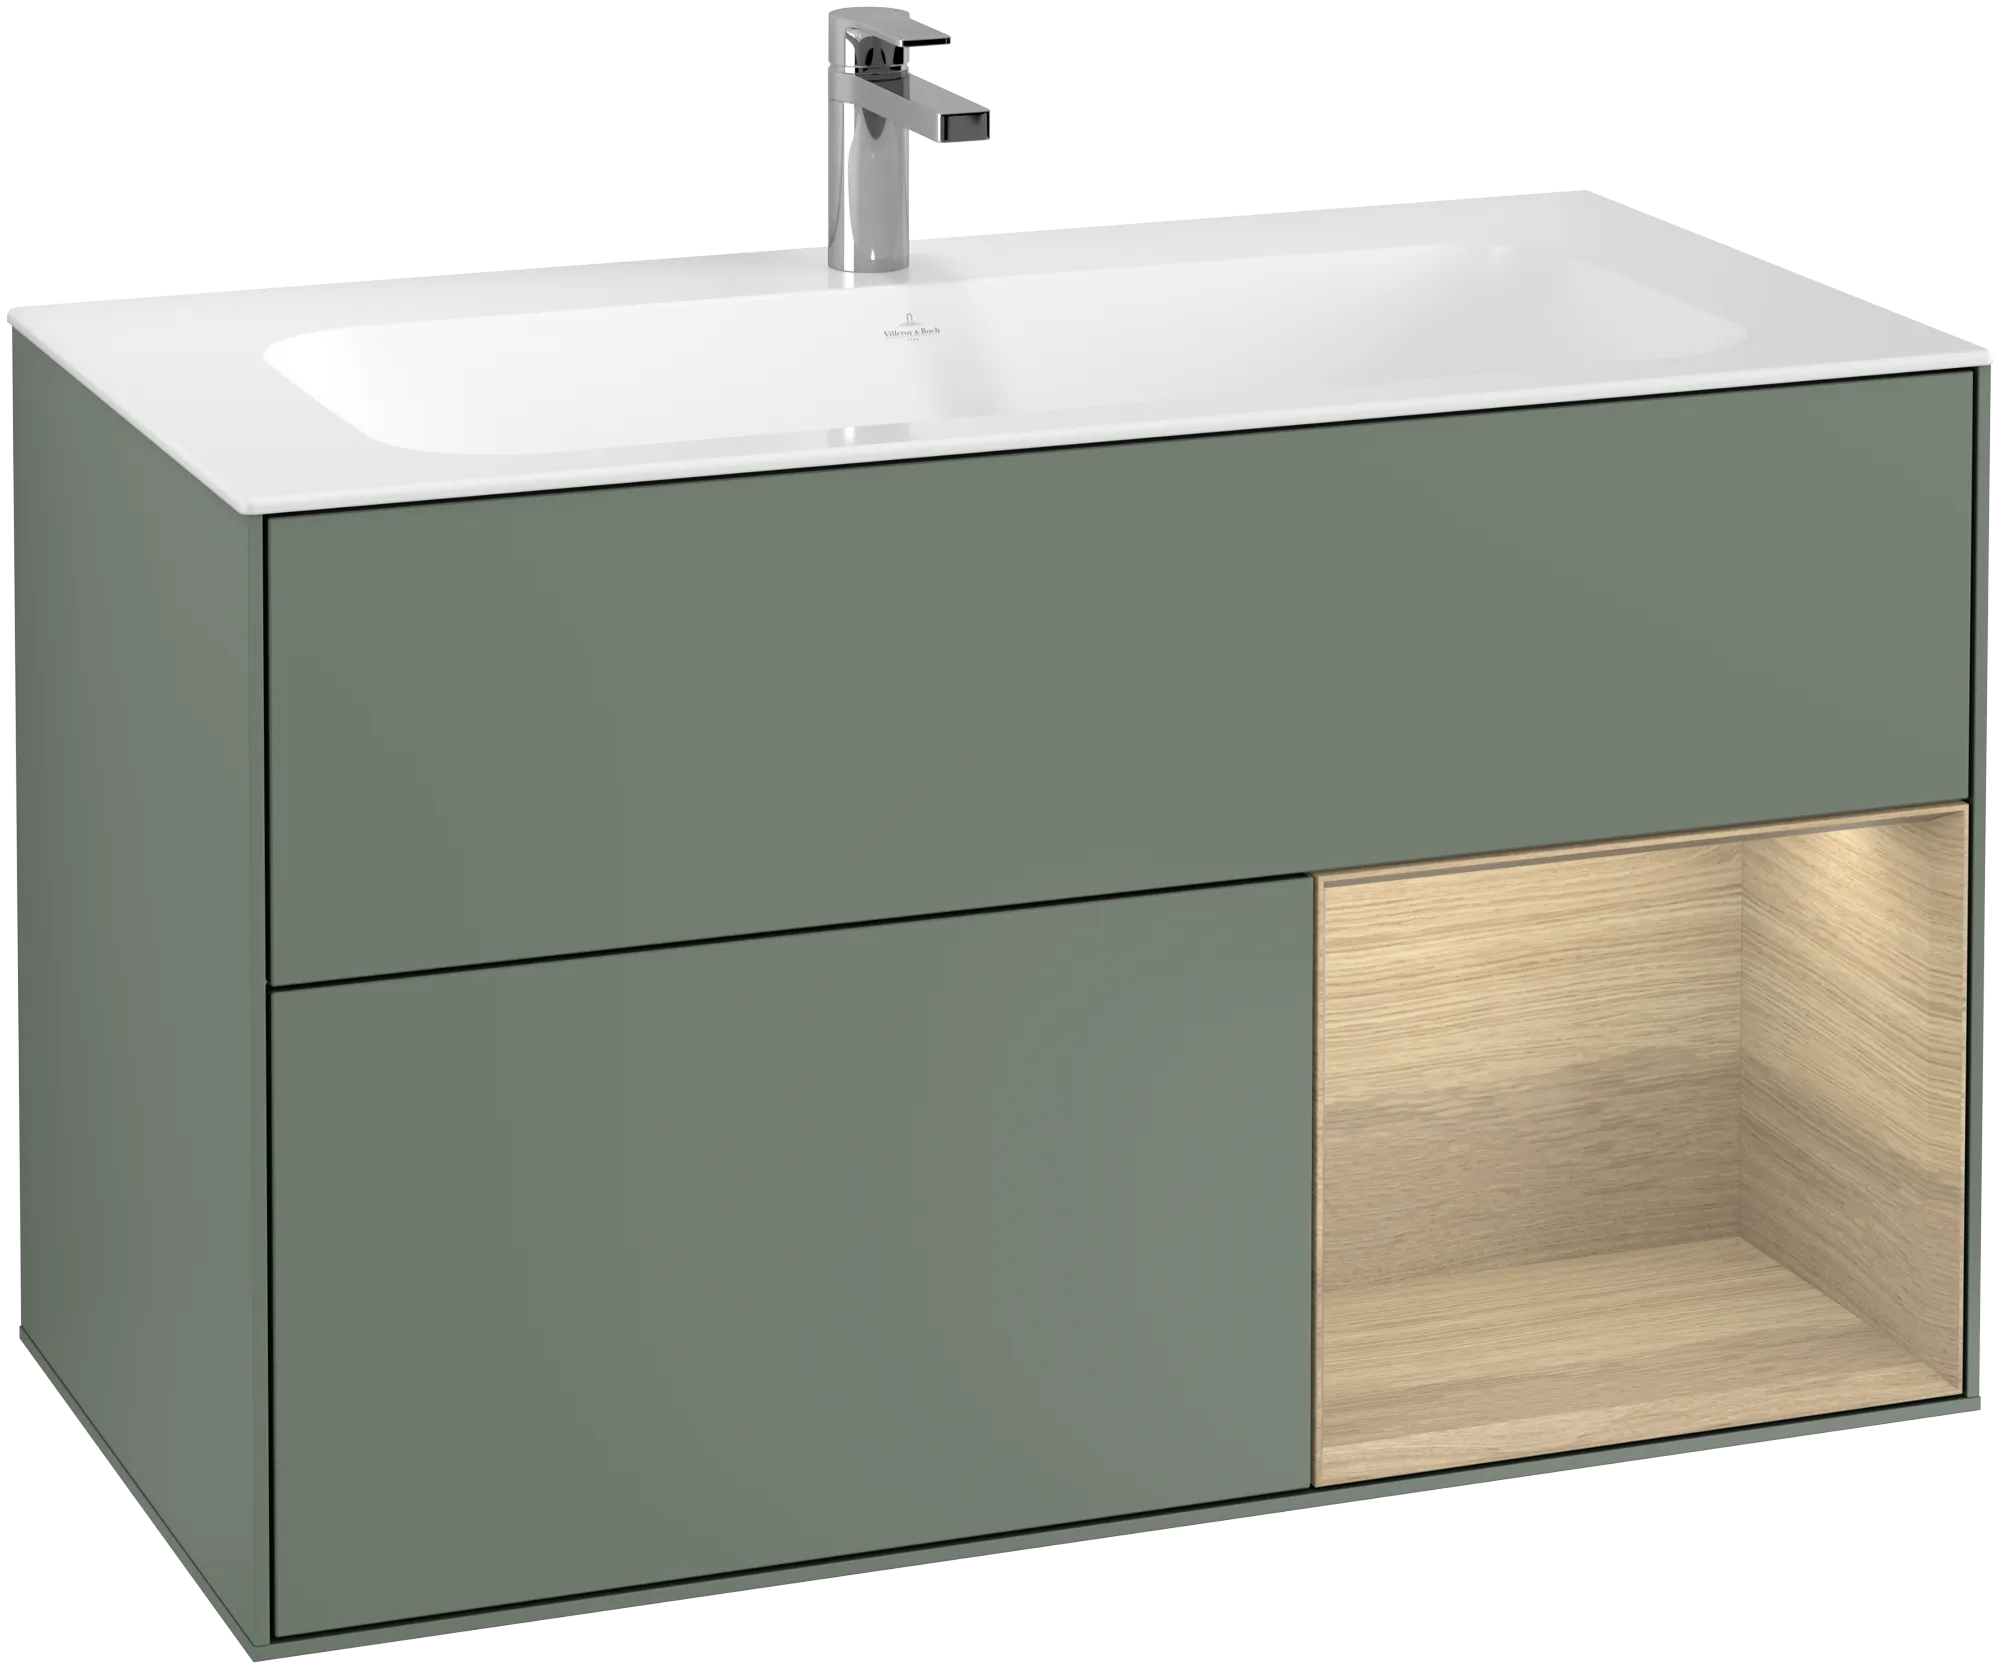 Picture of VILLEROY BOCH Finion Vanity unit, with lighting, 2 pull-out compartments, 996 x 591 x 498 mm, Olive Matt Lacquer / Oak Veneer #G040PCGM